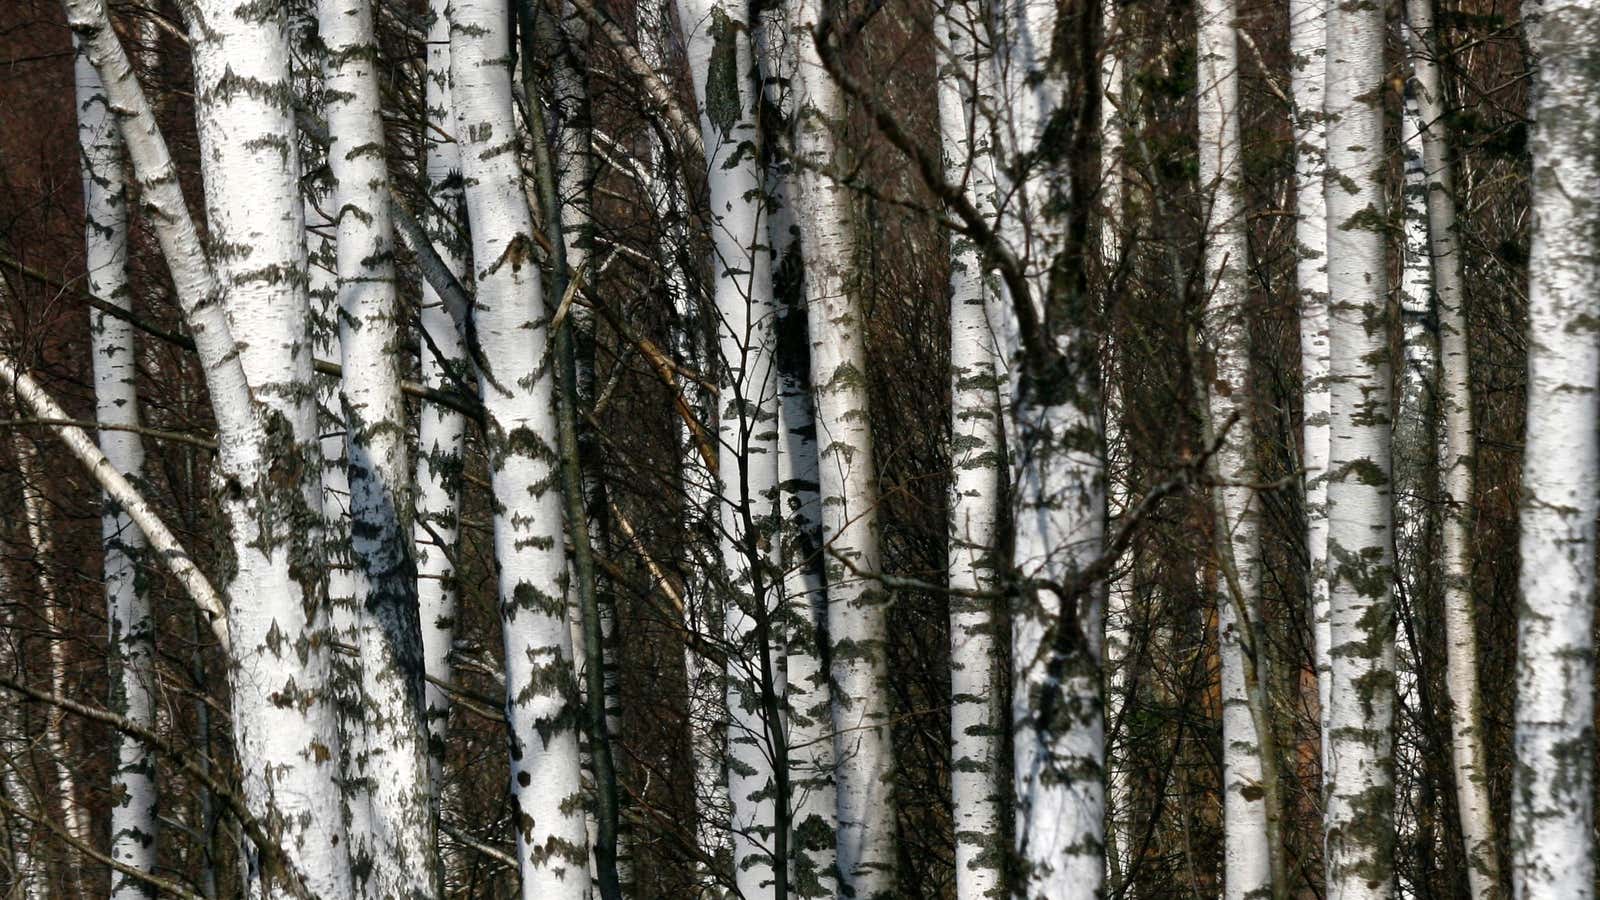 This birch grove would be an Anthropologie goldmine.